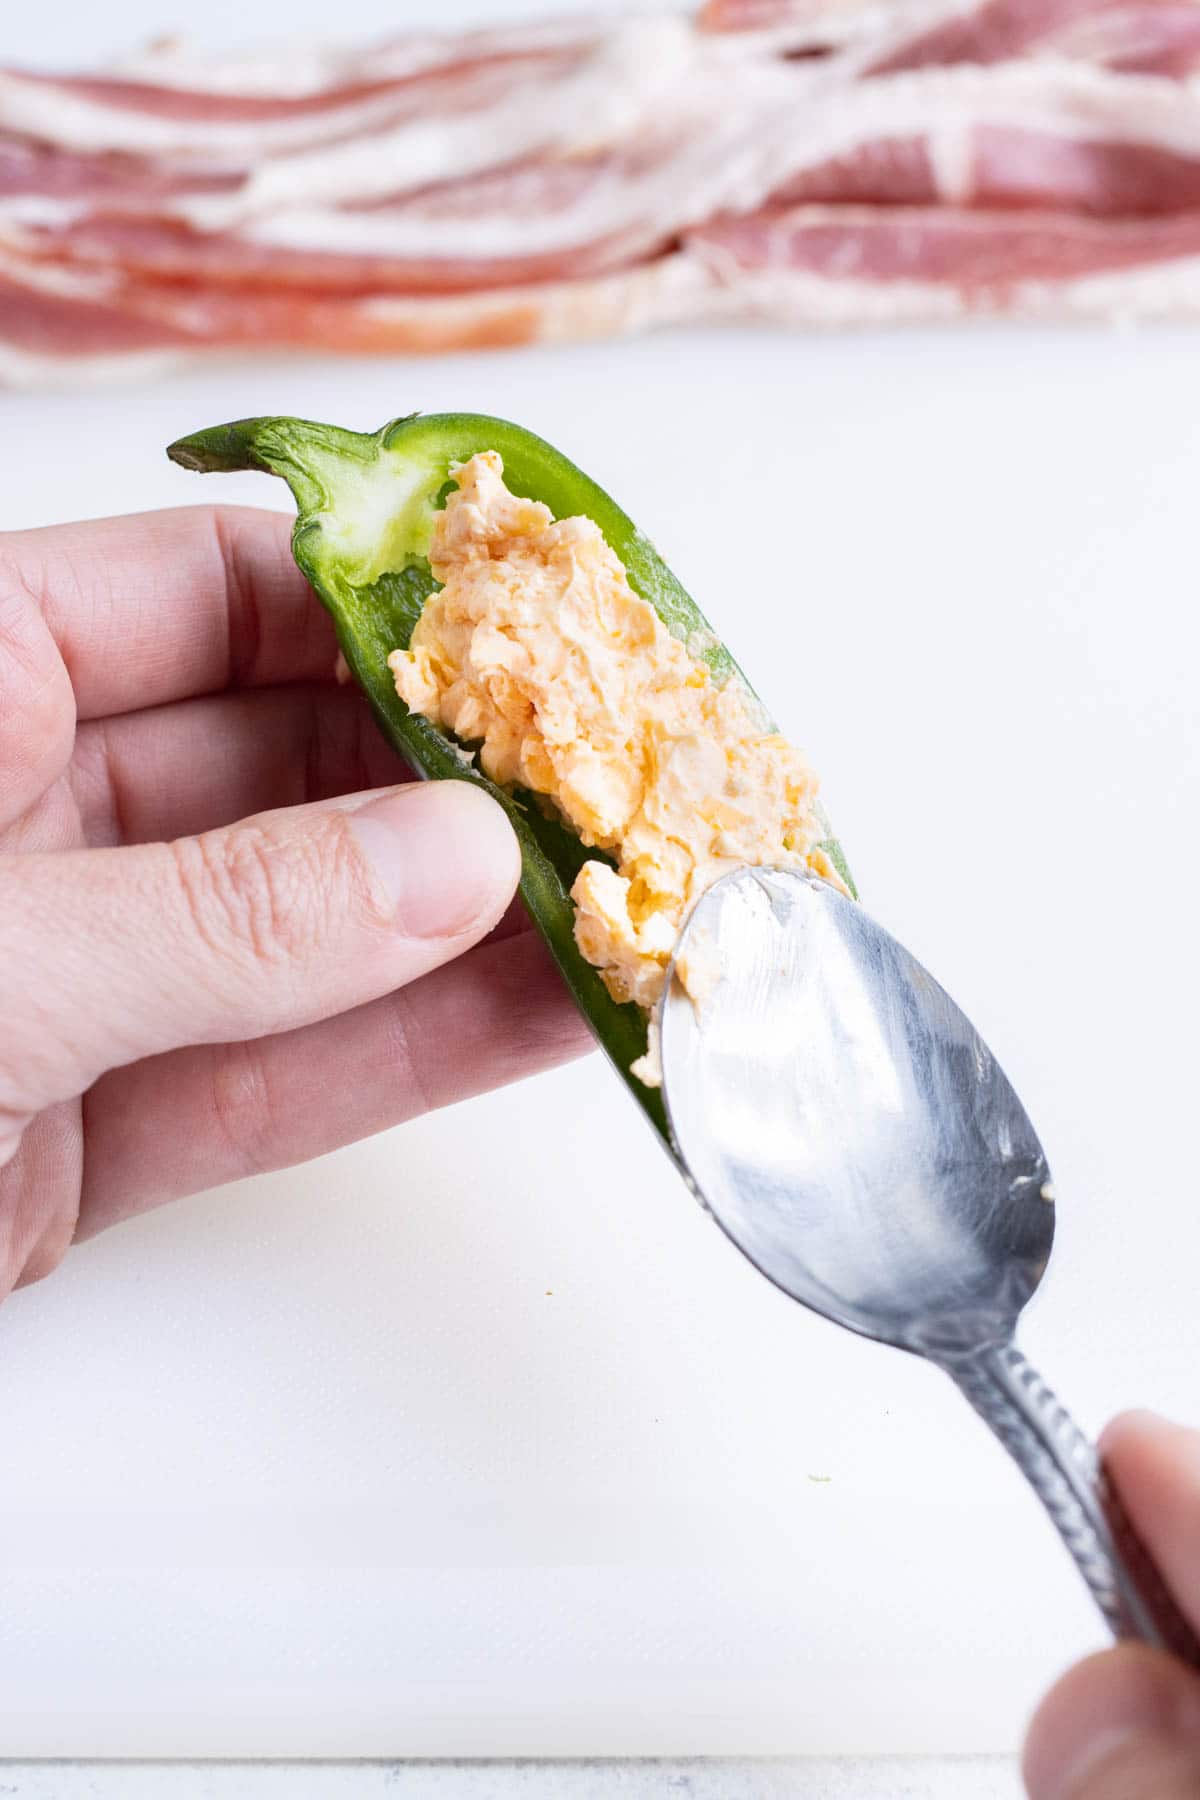 Cream cheese filling is added to the jalapeno.